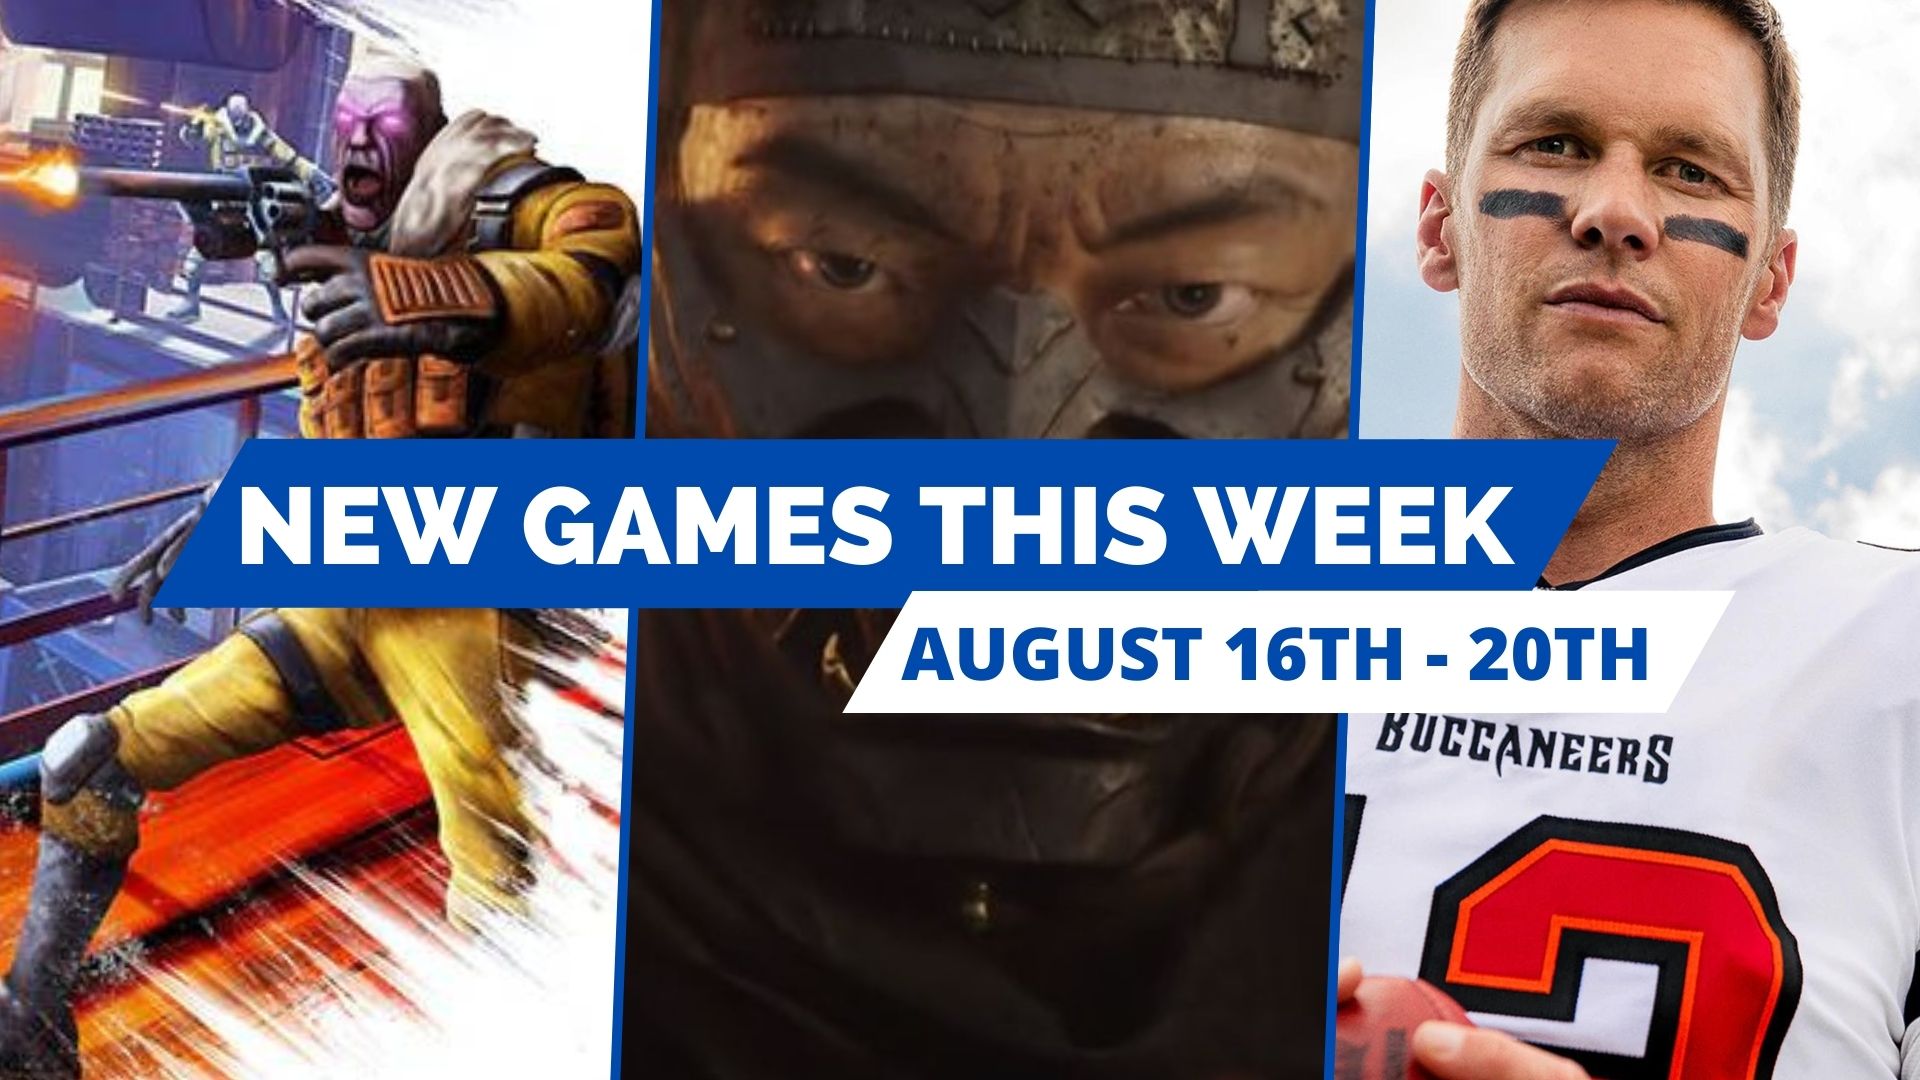 new games august 16th - august 20th